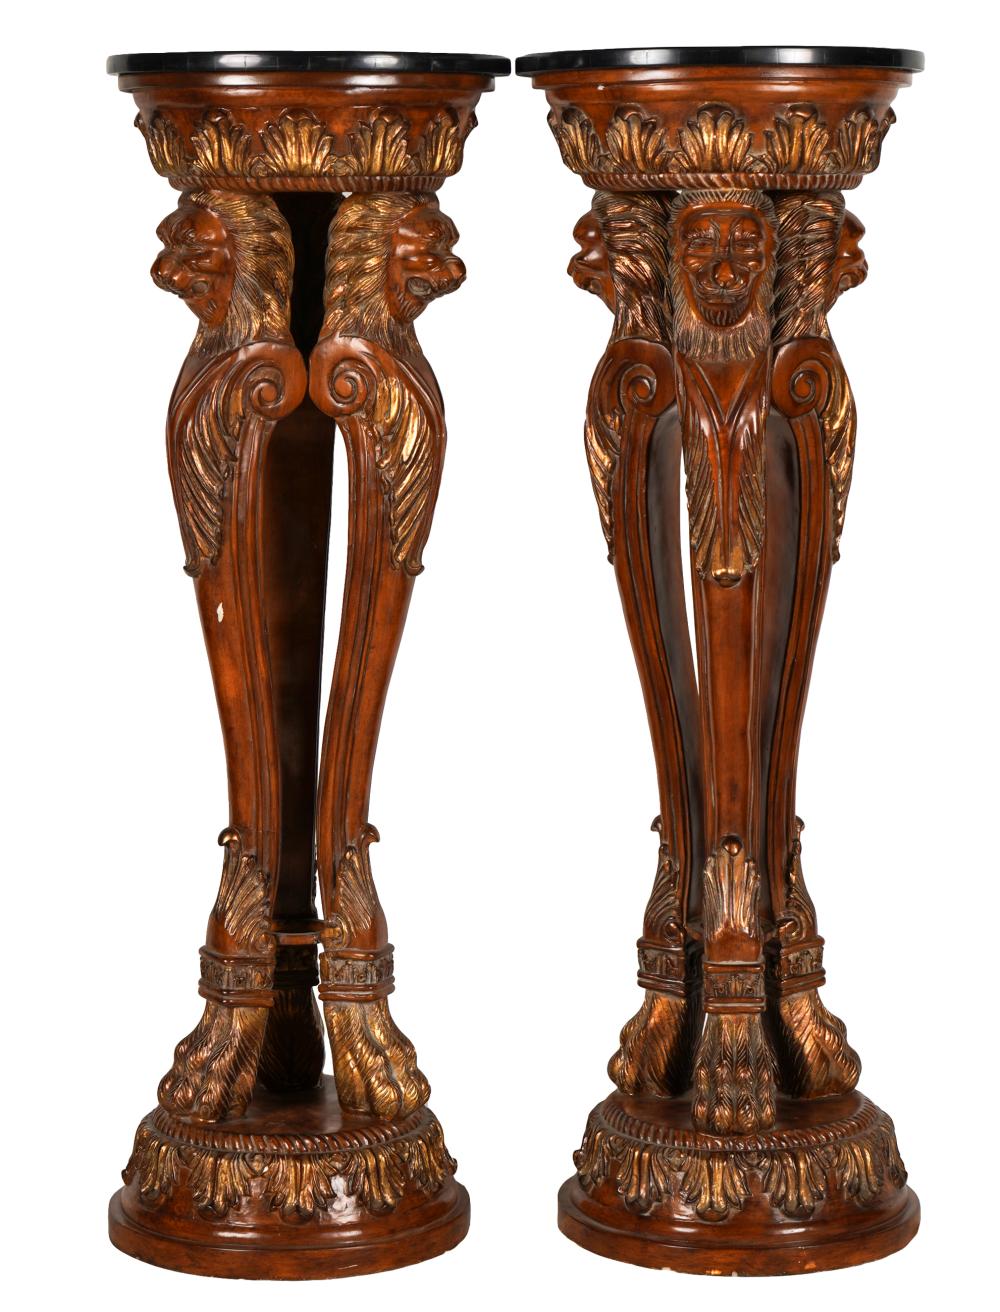 PAIR OF BAROQUE-STYLE CARVED FERN